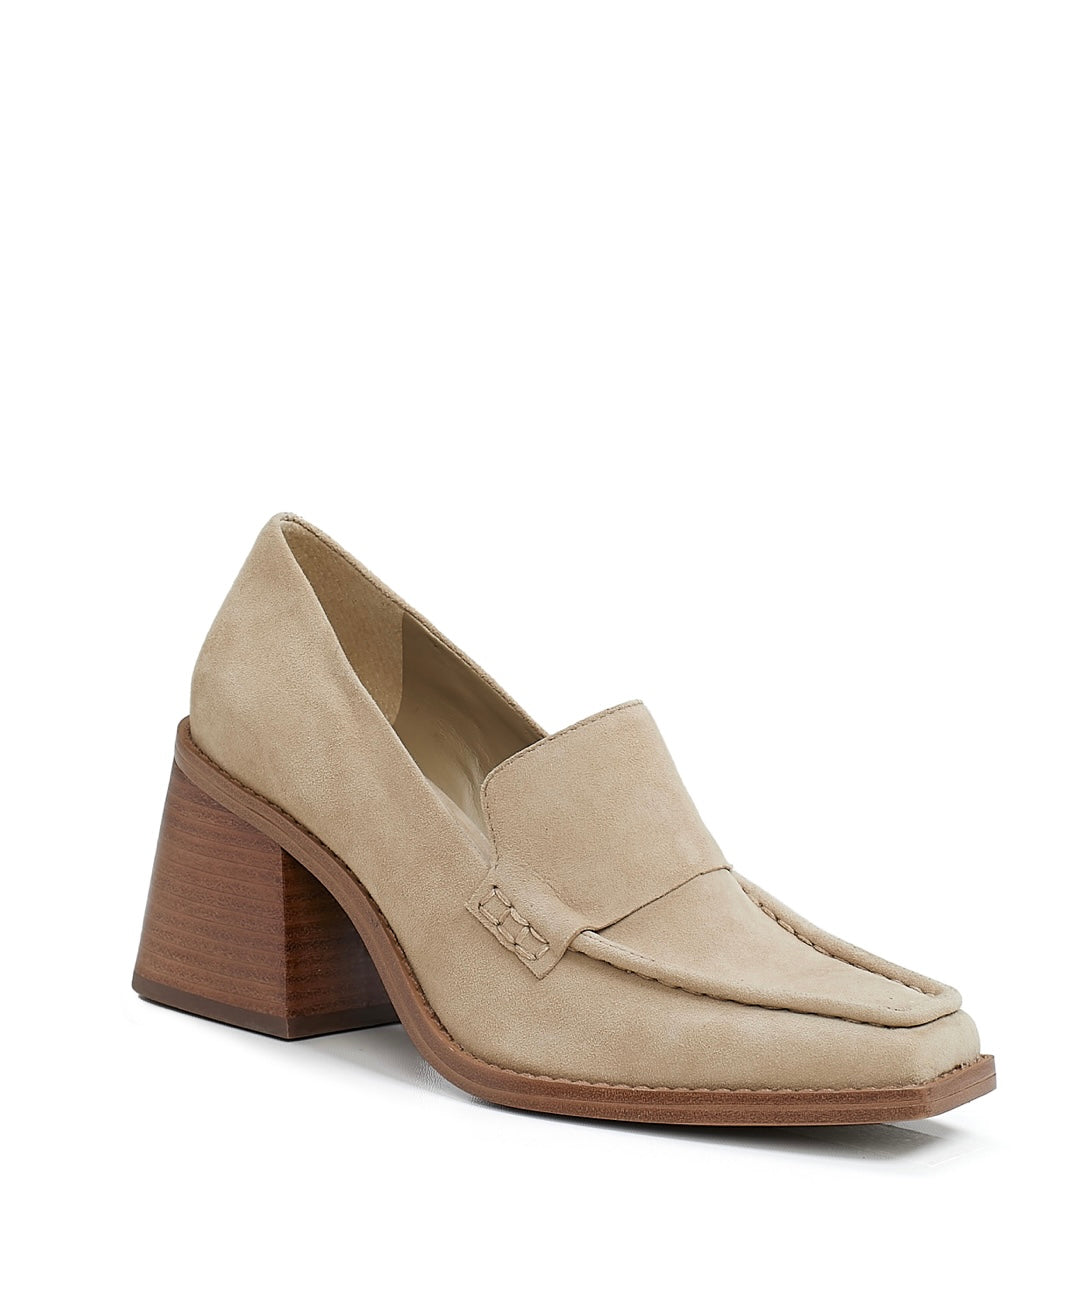 Vince Camuto Segellis Loafer Silver or Tan